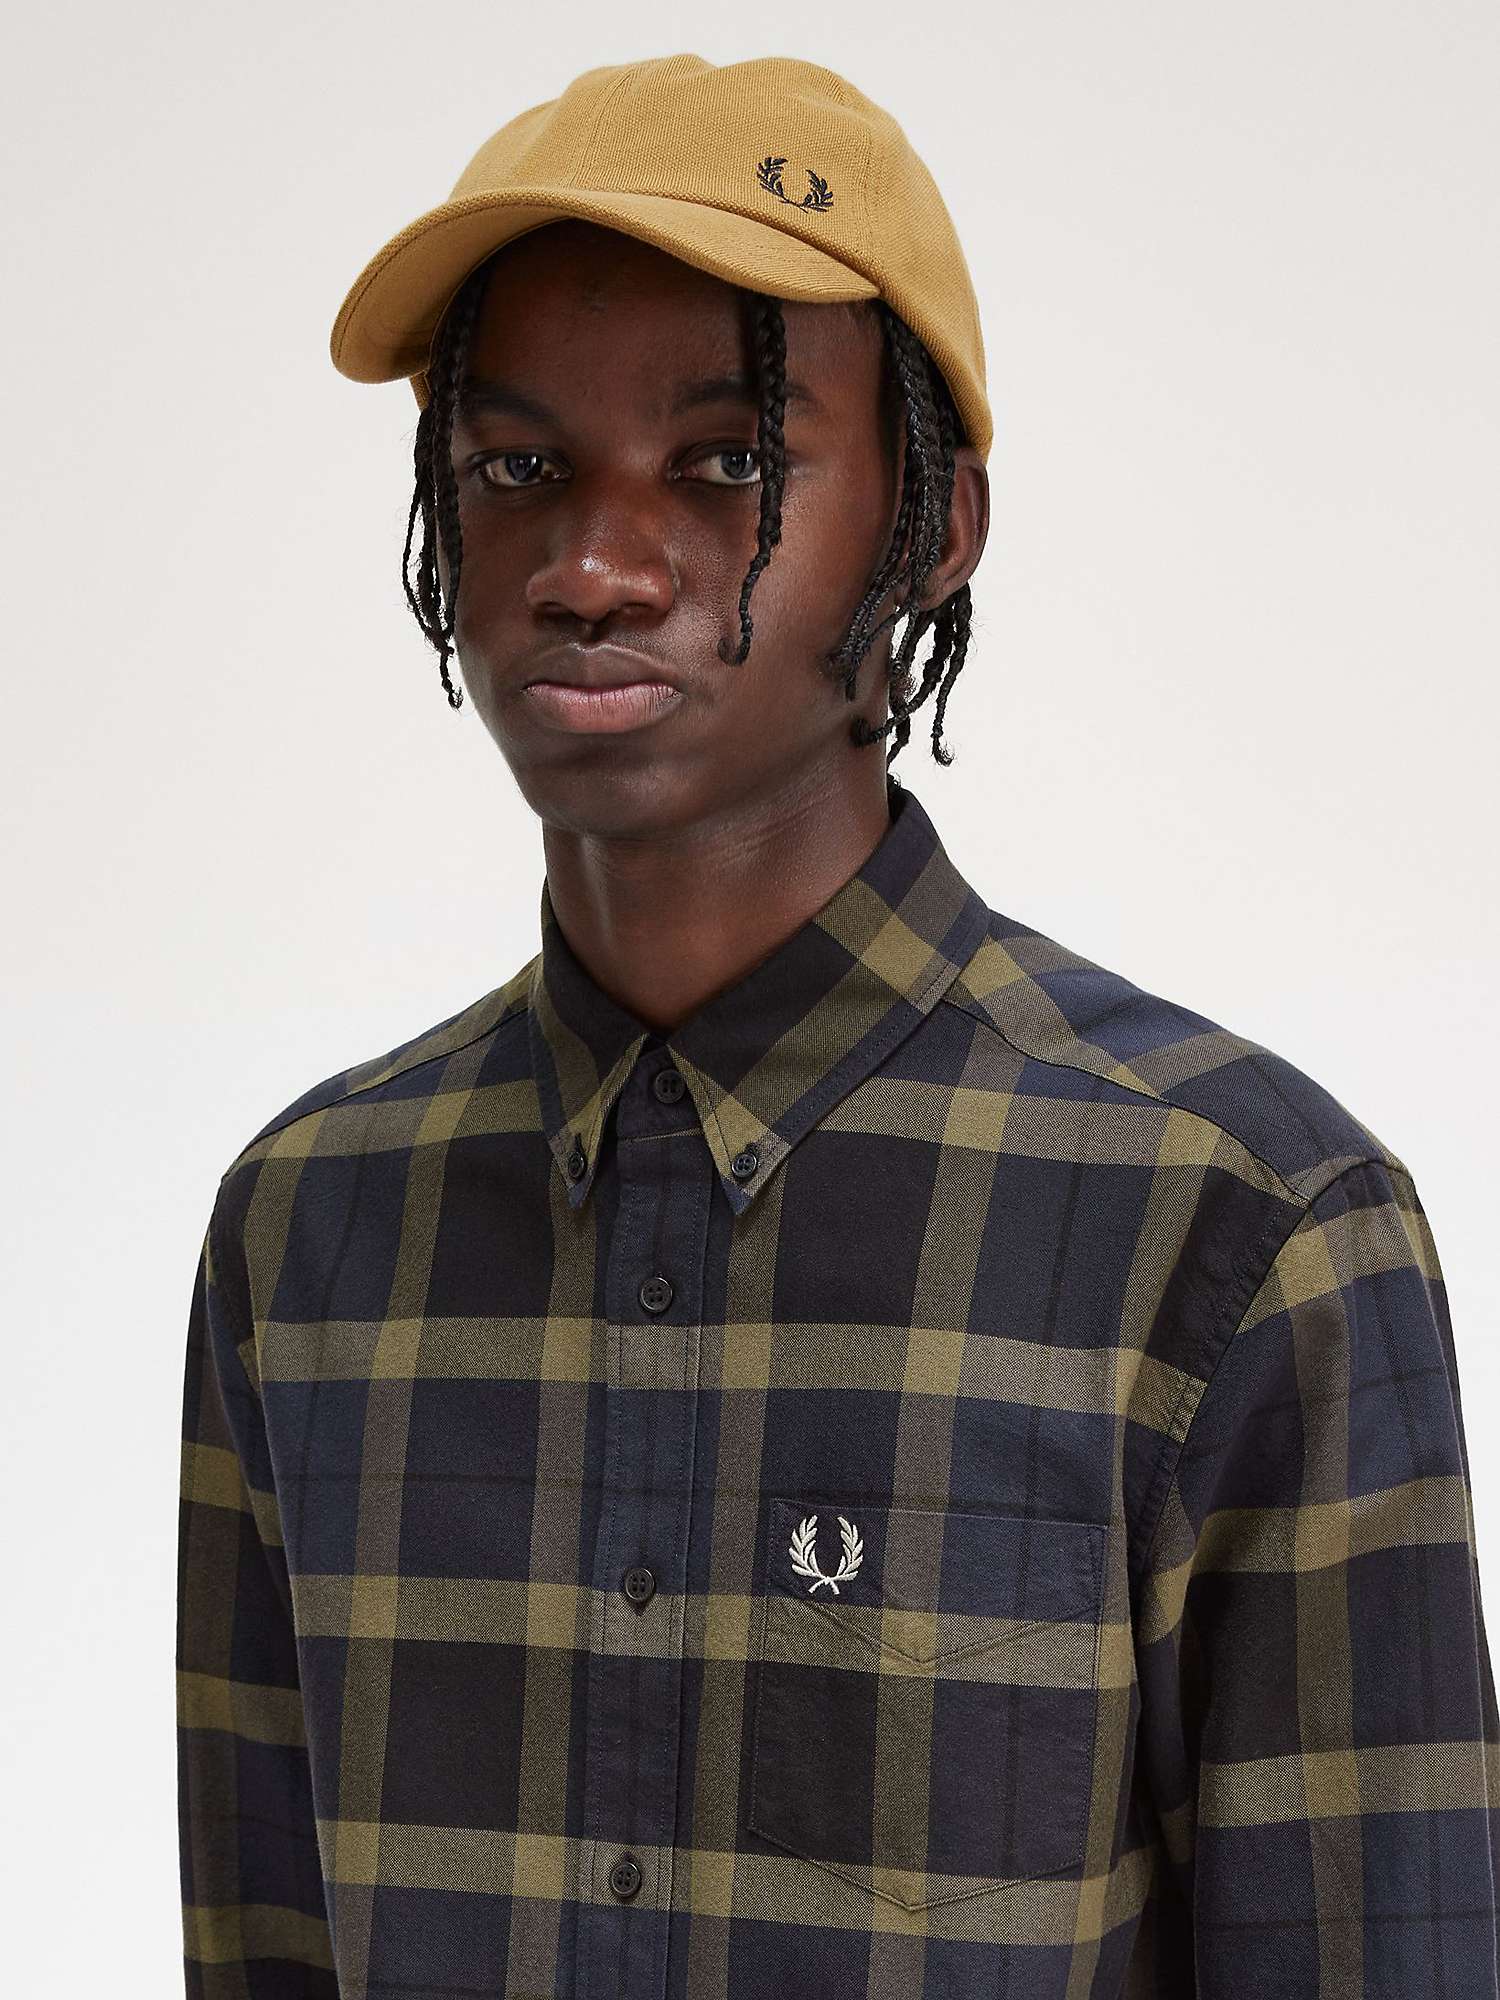 Buy Fred Perry Tartan Oxford Shirt Online at johnlewis.com